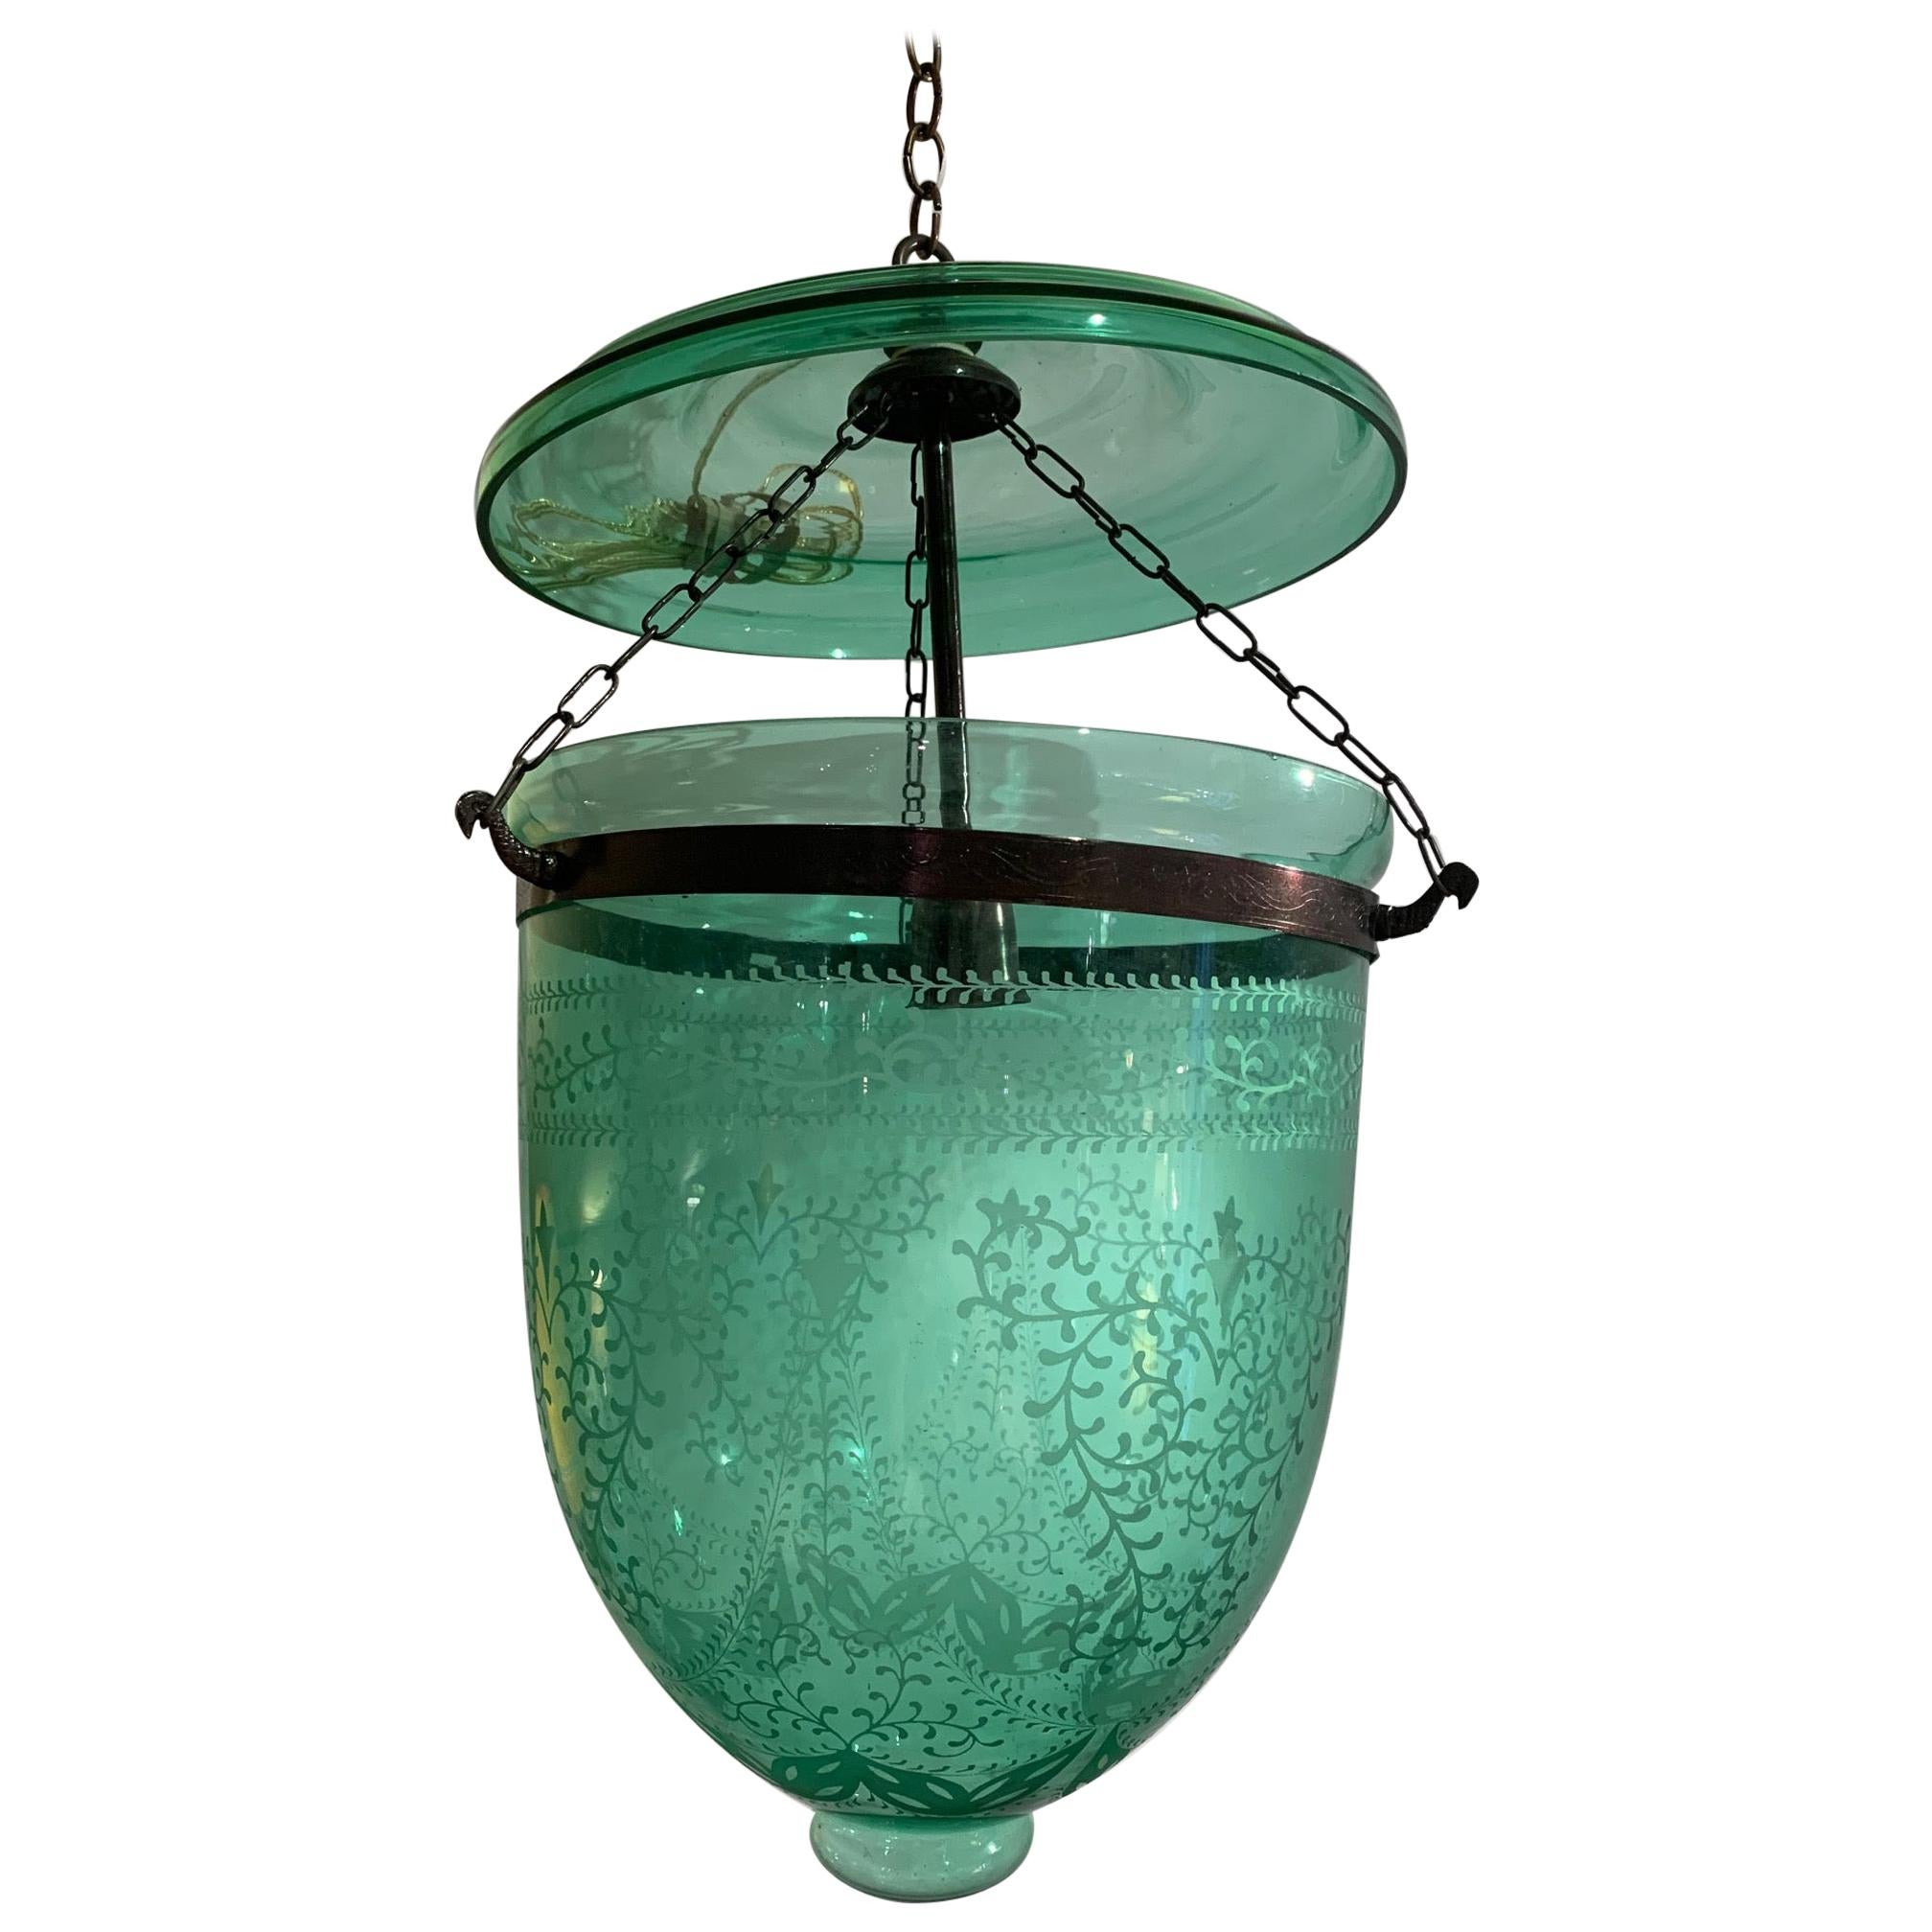 Lovely Vintage English Green Etched Glass Bell Jar Fixture